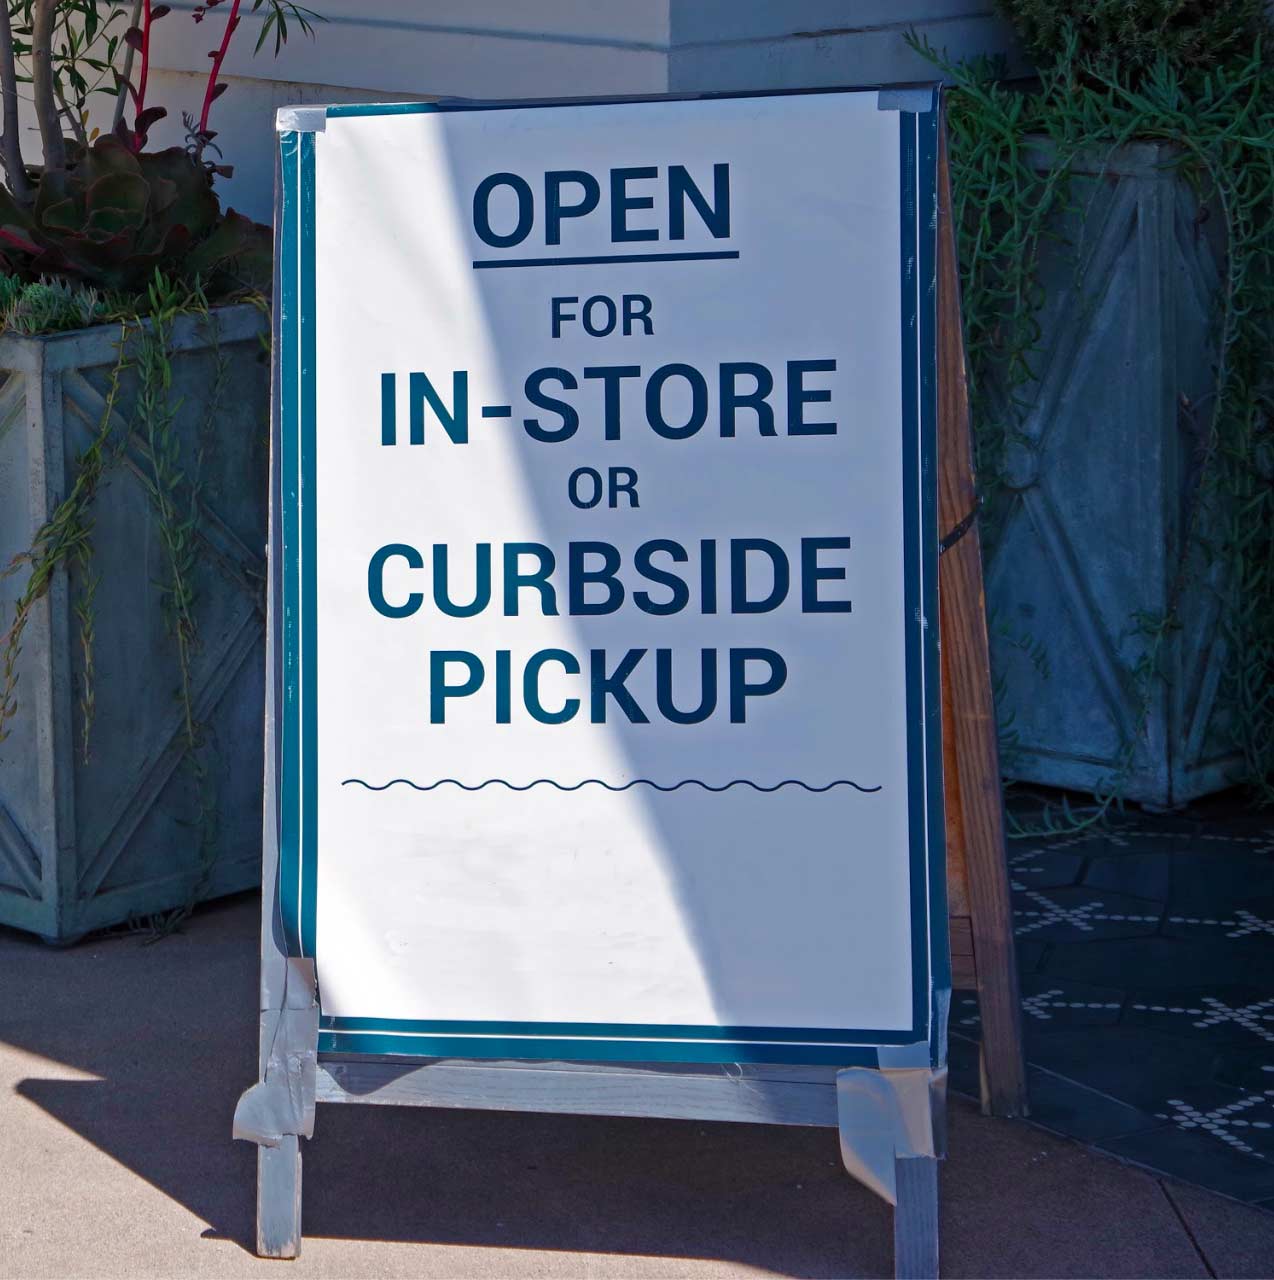 Sign outside shop saying, “Open for In-store or curbside pickup,” reflecting COVID-19 restrictions.